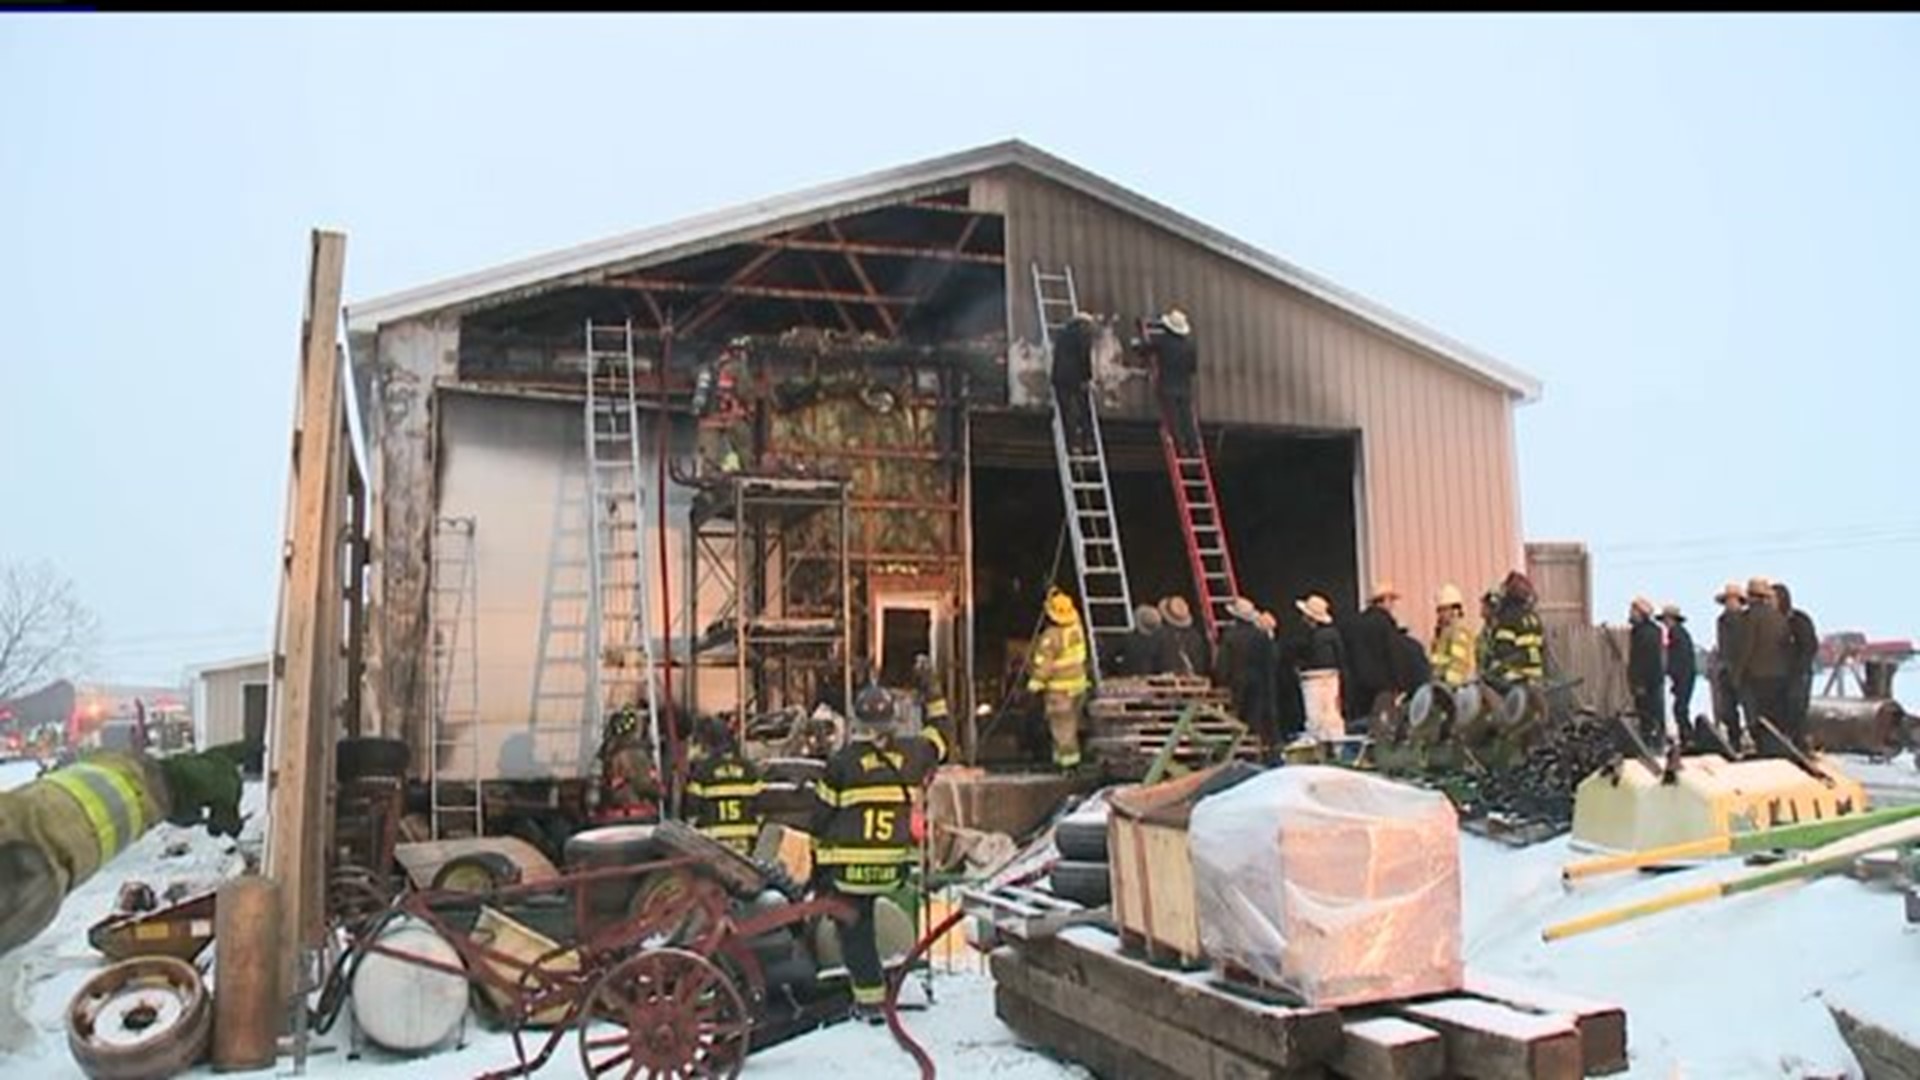 Farm Equipment Repair Shop Fire in Northumberland County